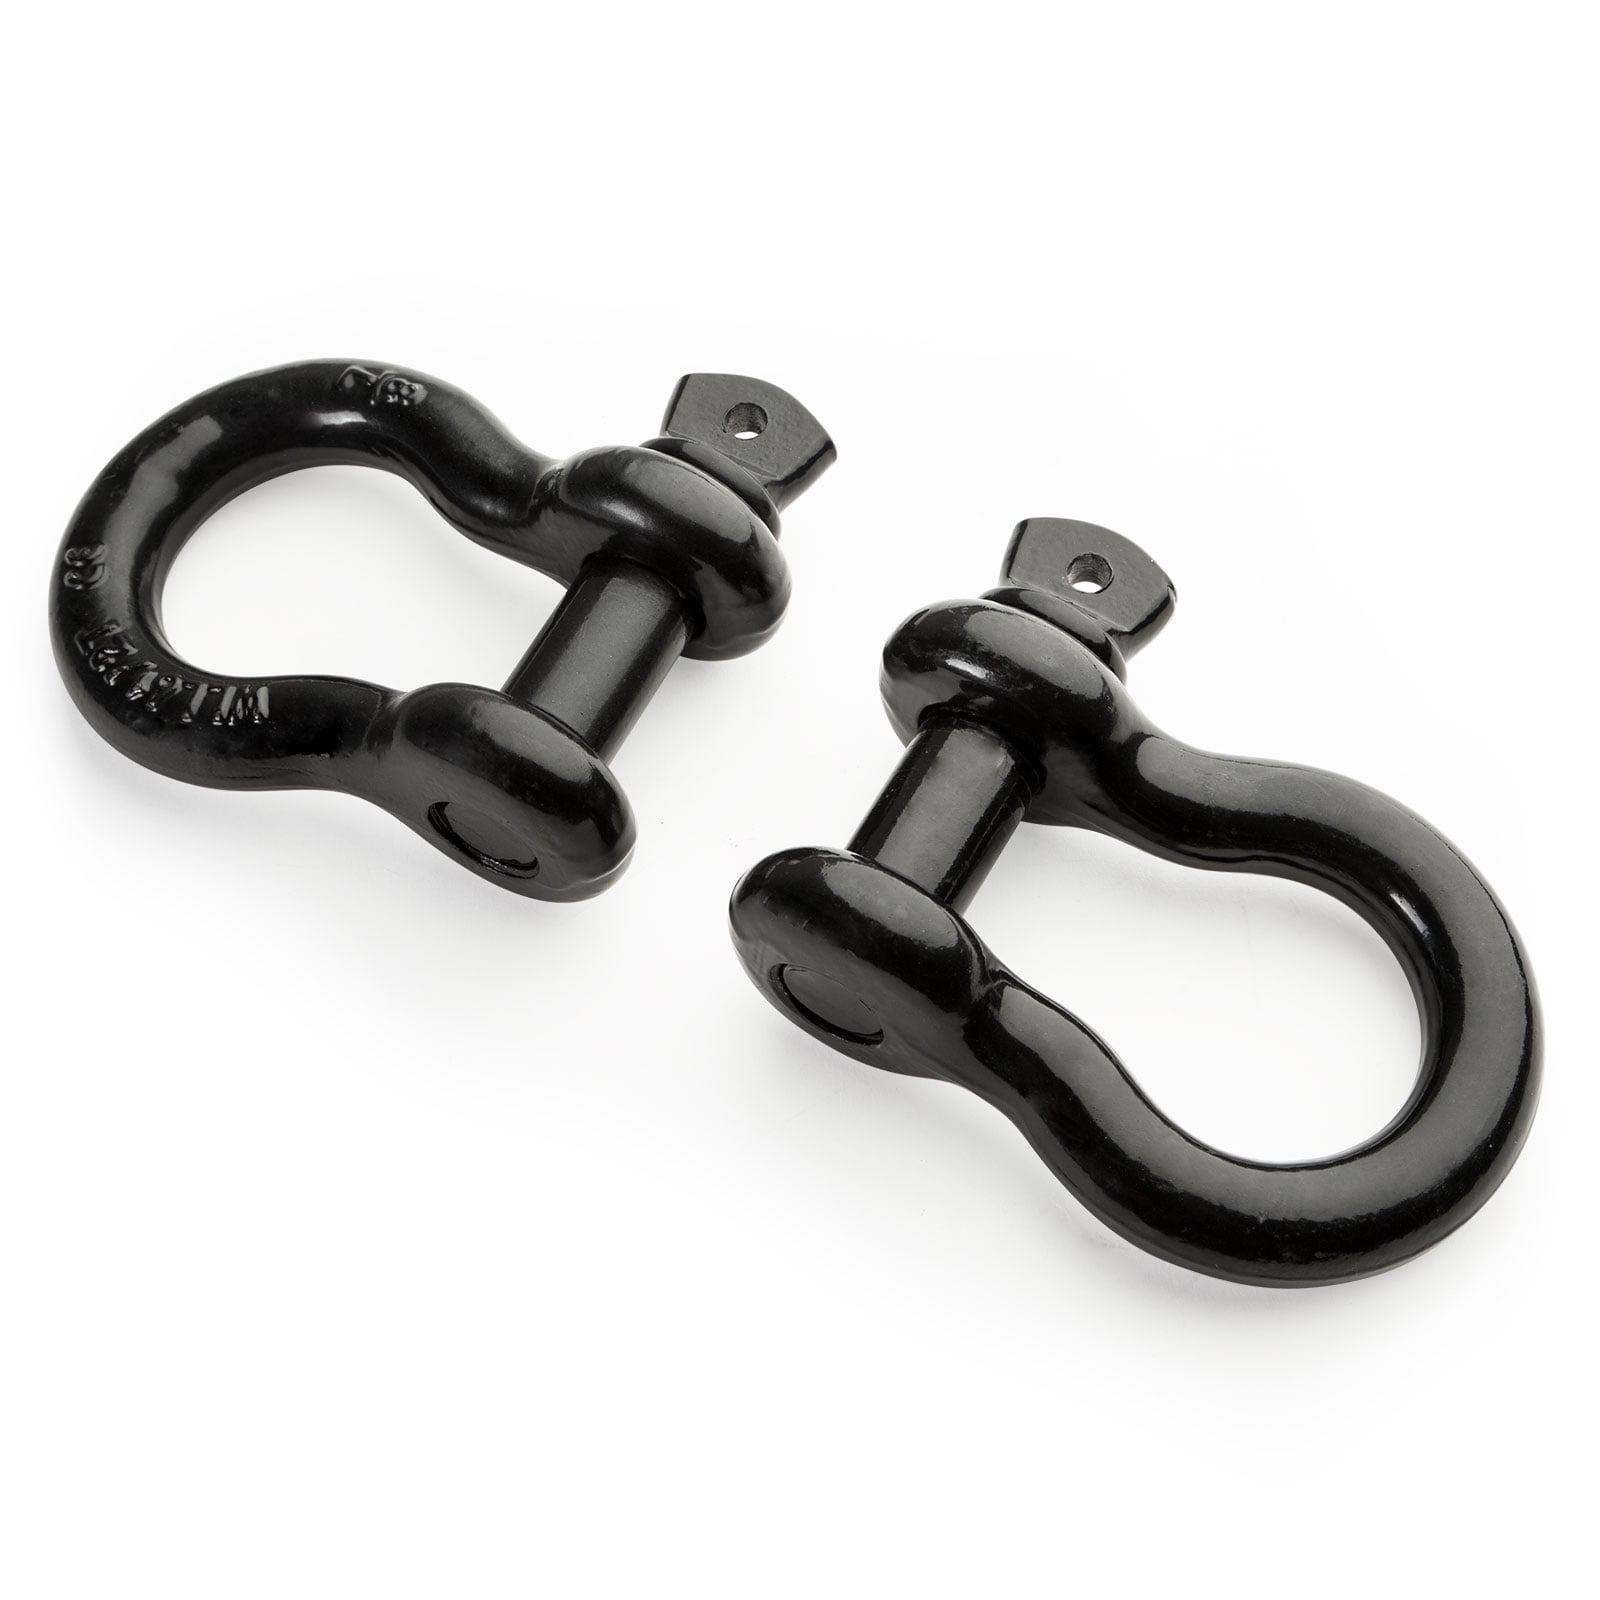 13,000 Pounds Working Capacity Driver Recovery 2 Pack 7/8 D-Ring/Bow Shackle - Extreme Heavy-Duty Grade 70 Black Powder Coated Steel for Off Road Towing 6.5 Ton Jeep Accessory or Truck